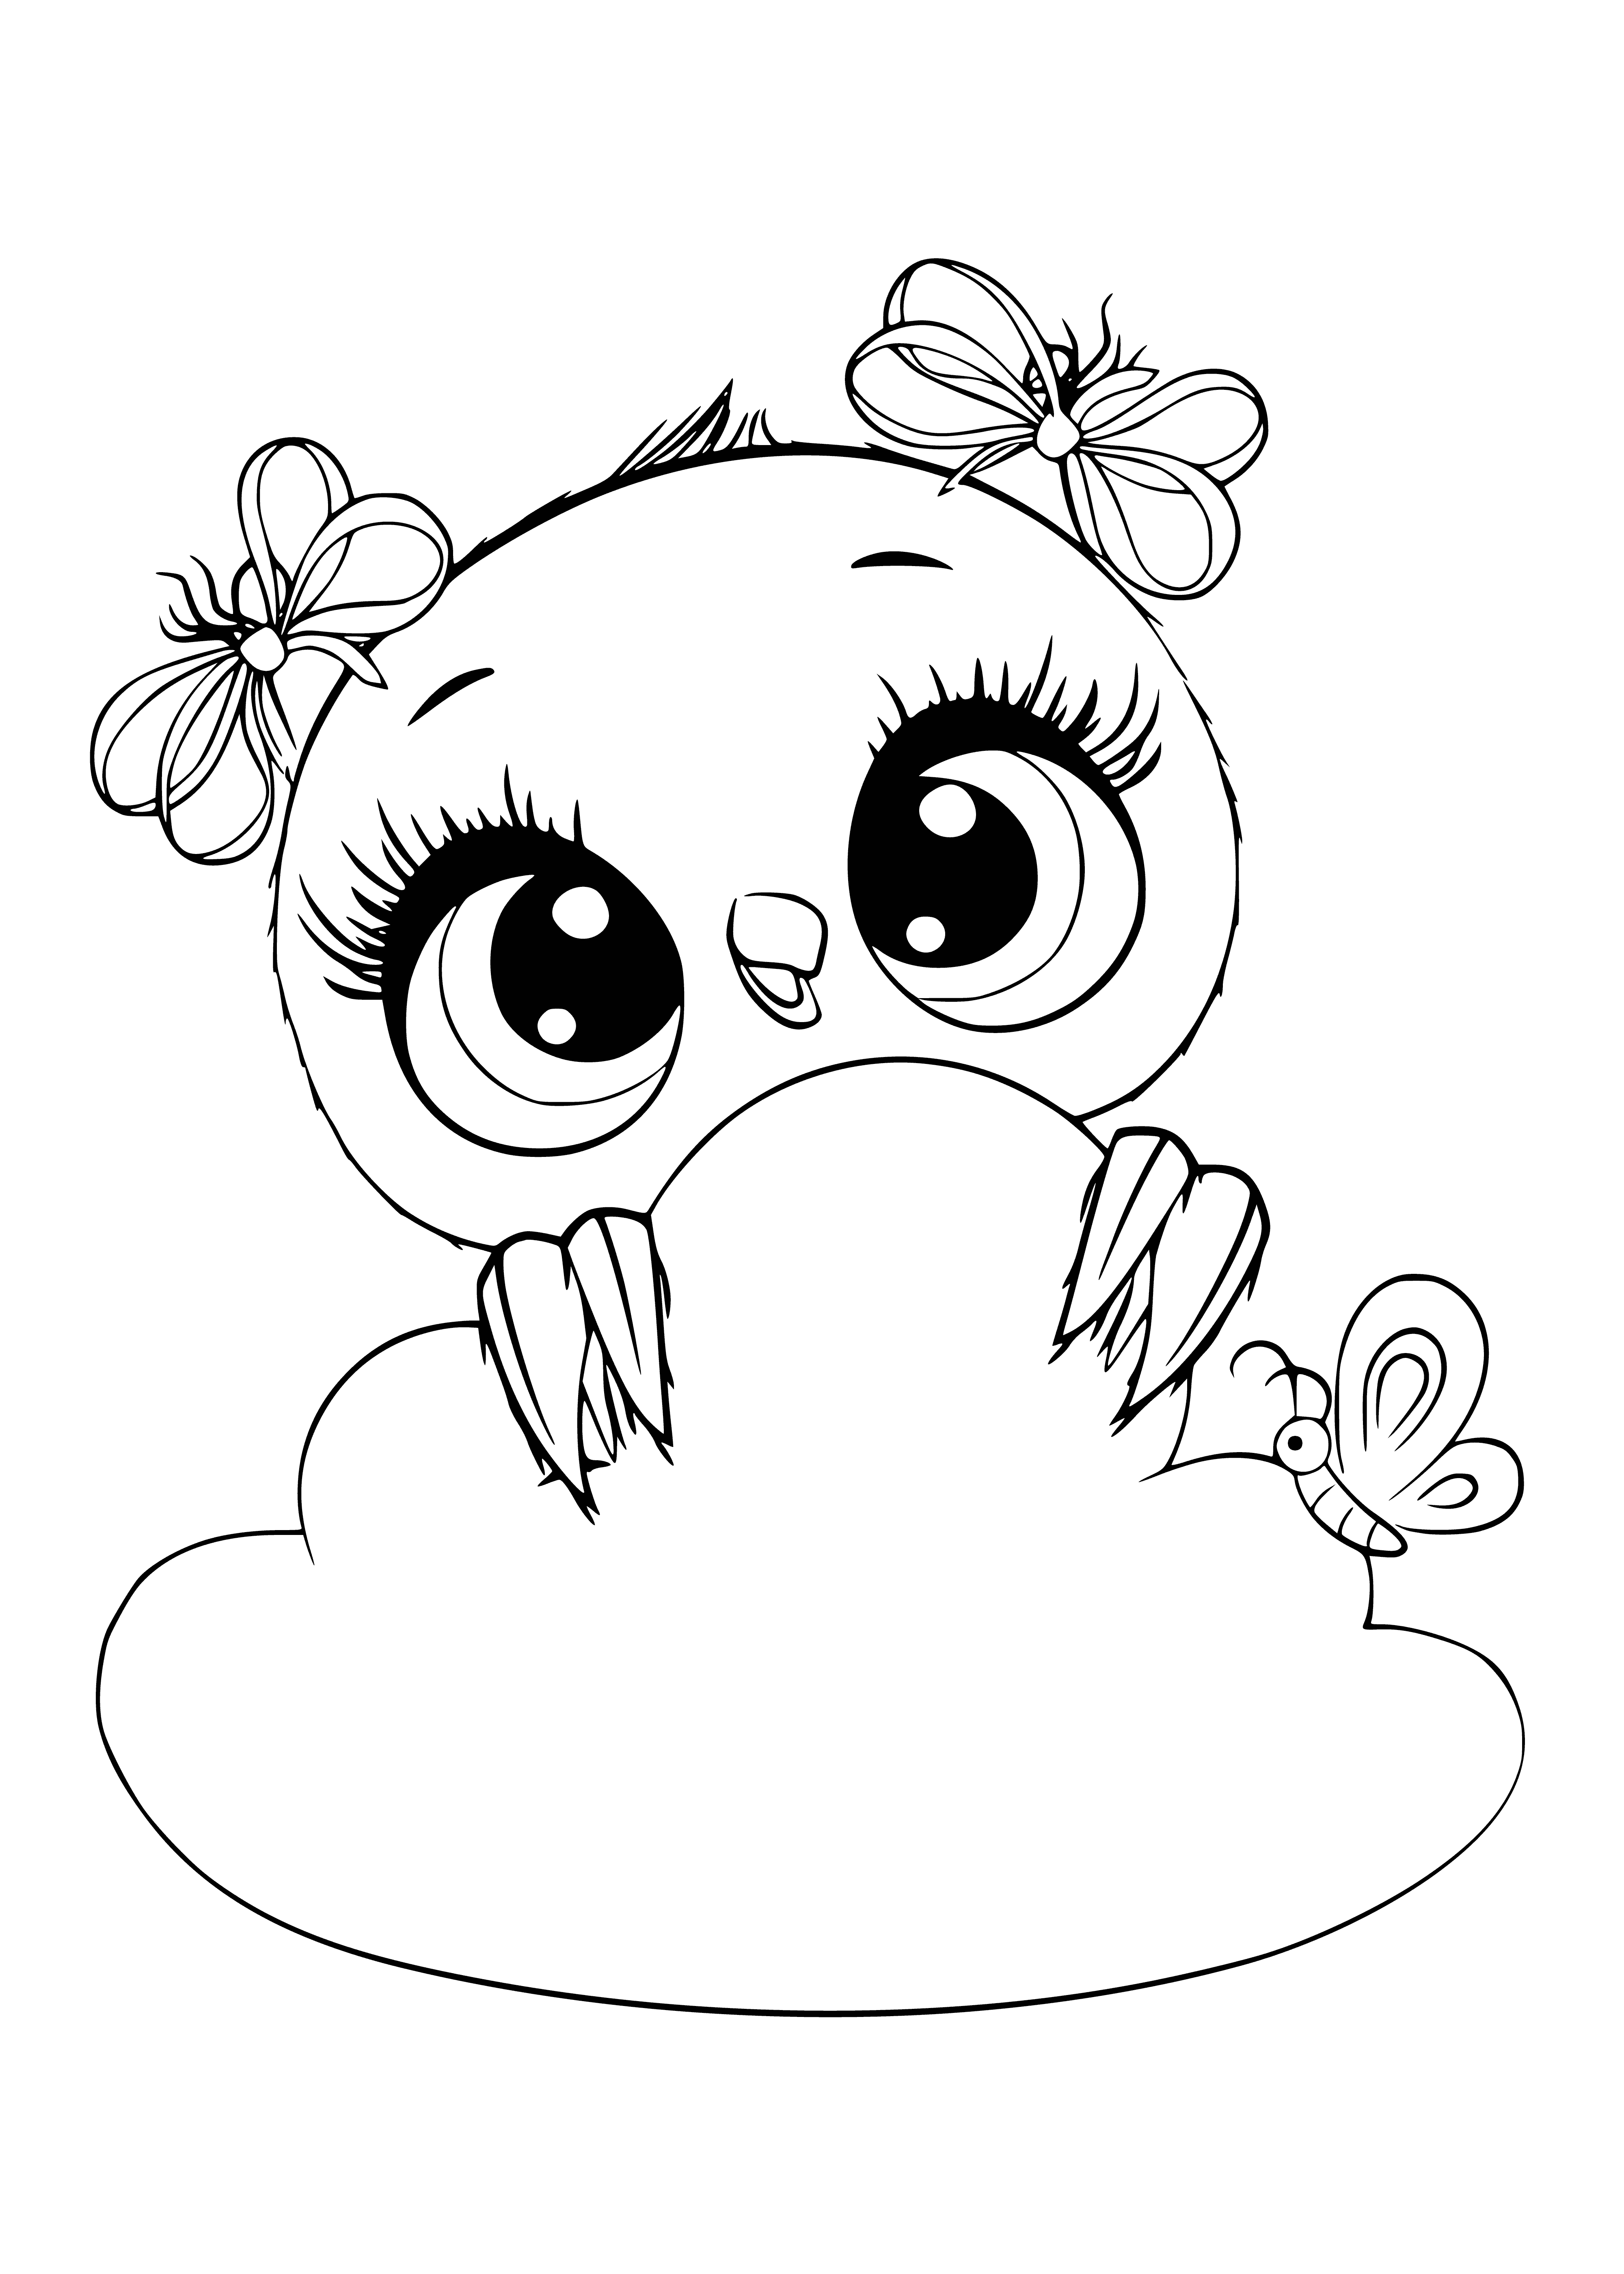 Chicken and cloud coloring page